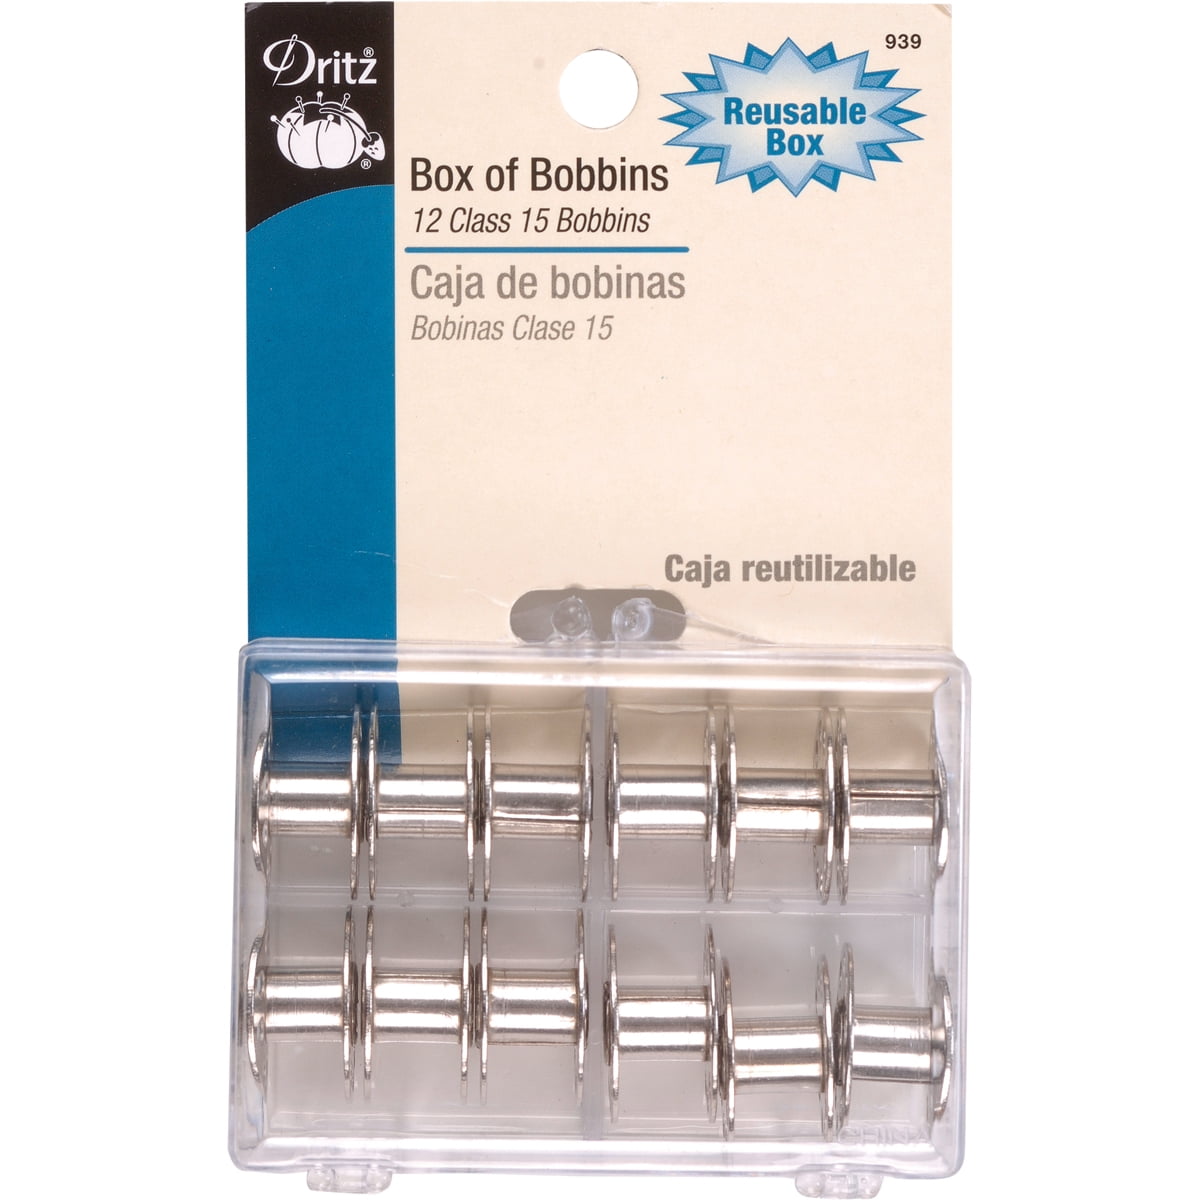 Package of 12 Class 15J Bobbins.